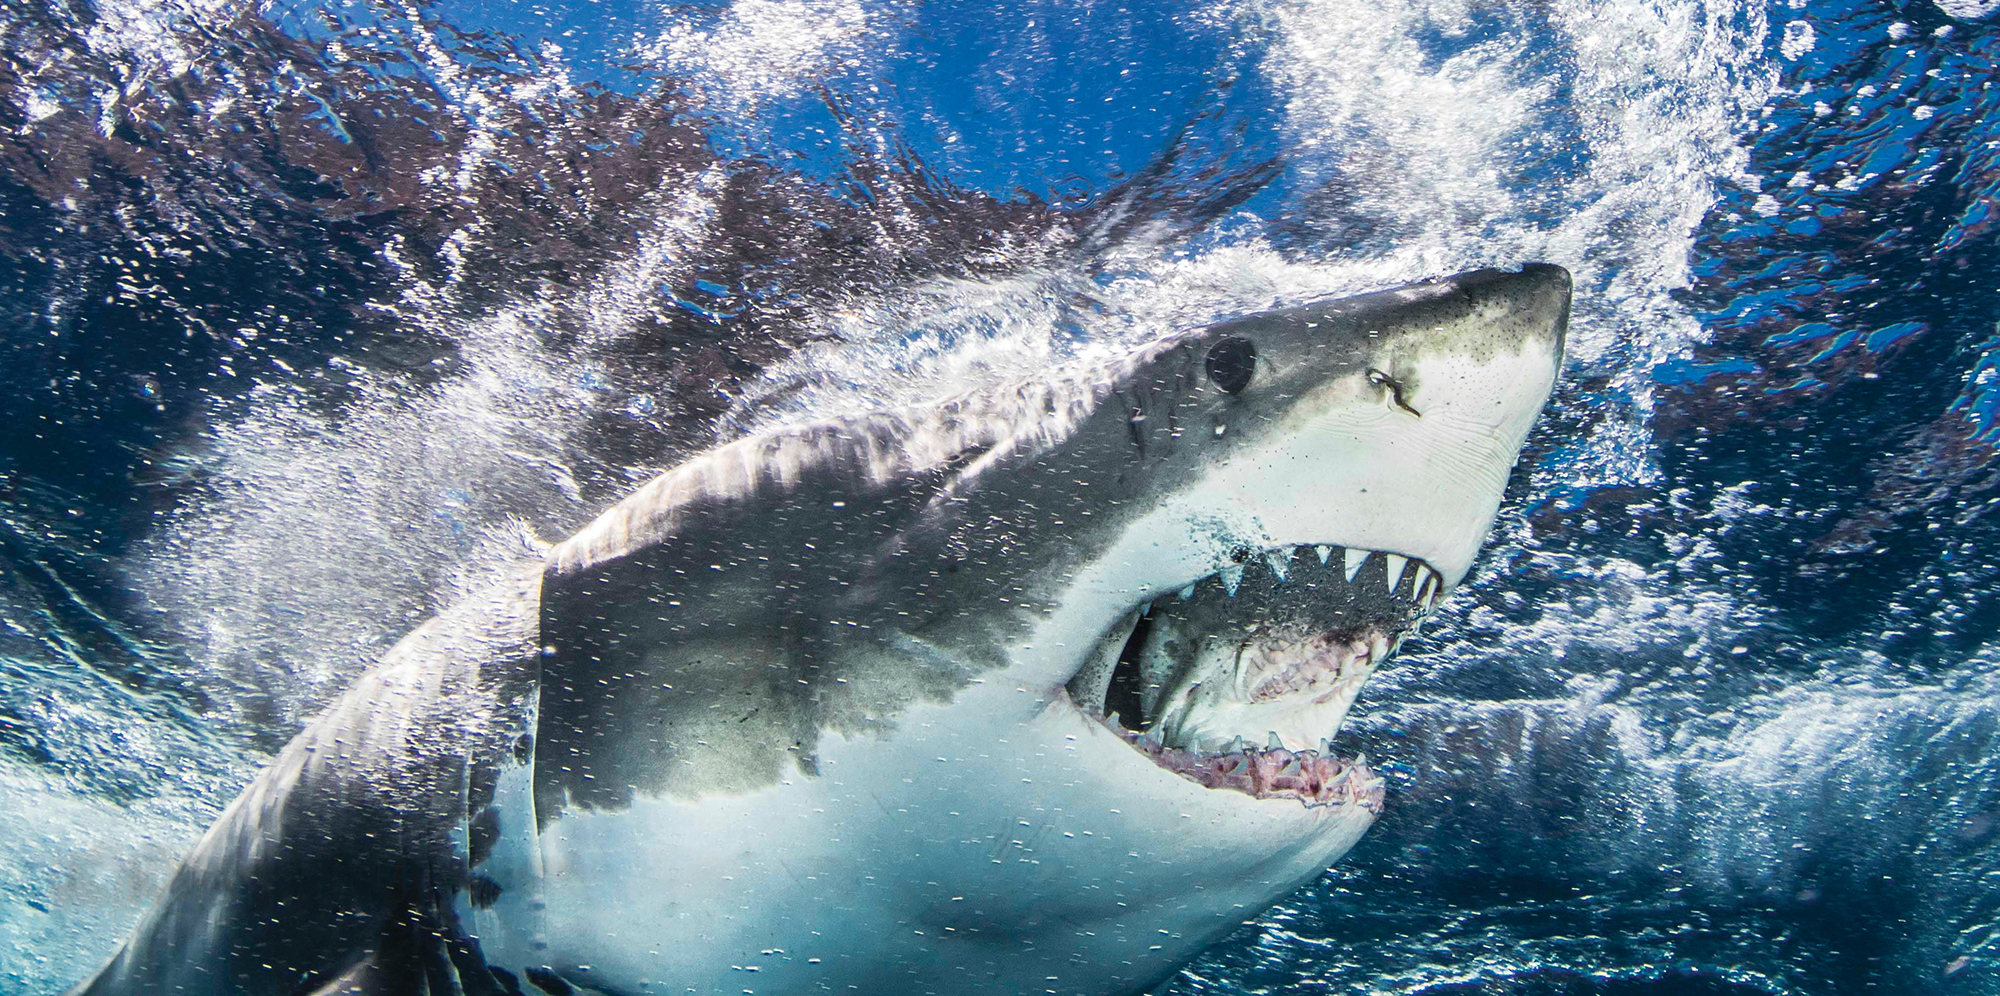 What are some great white shark misconceptions?